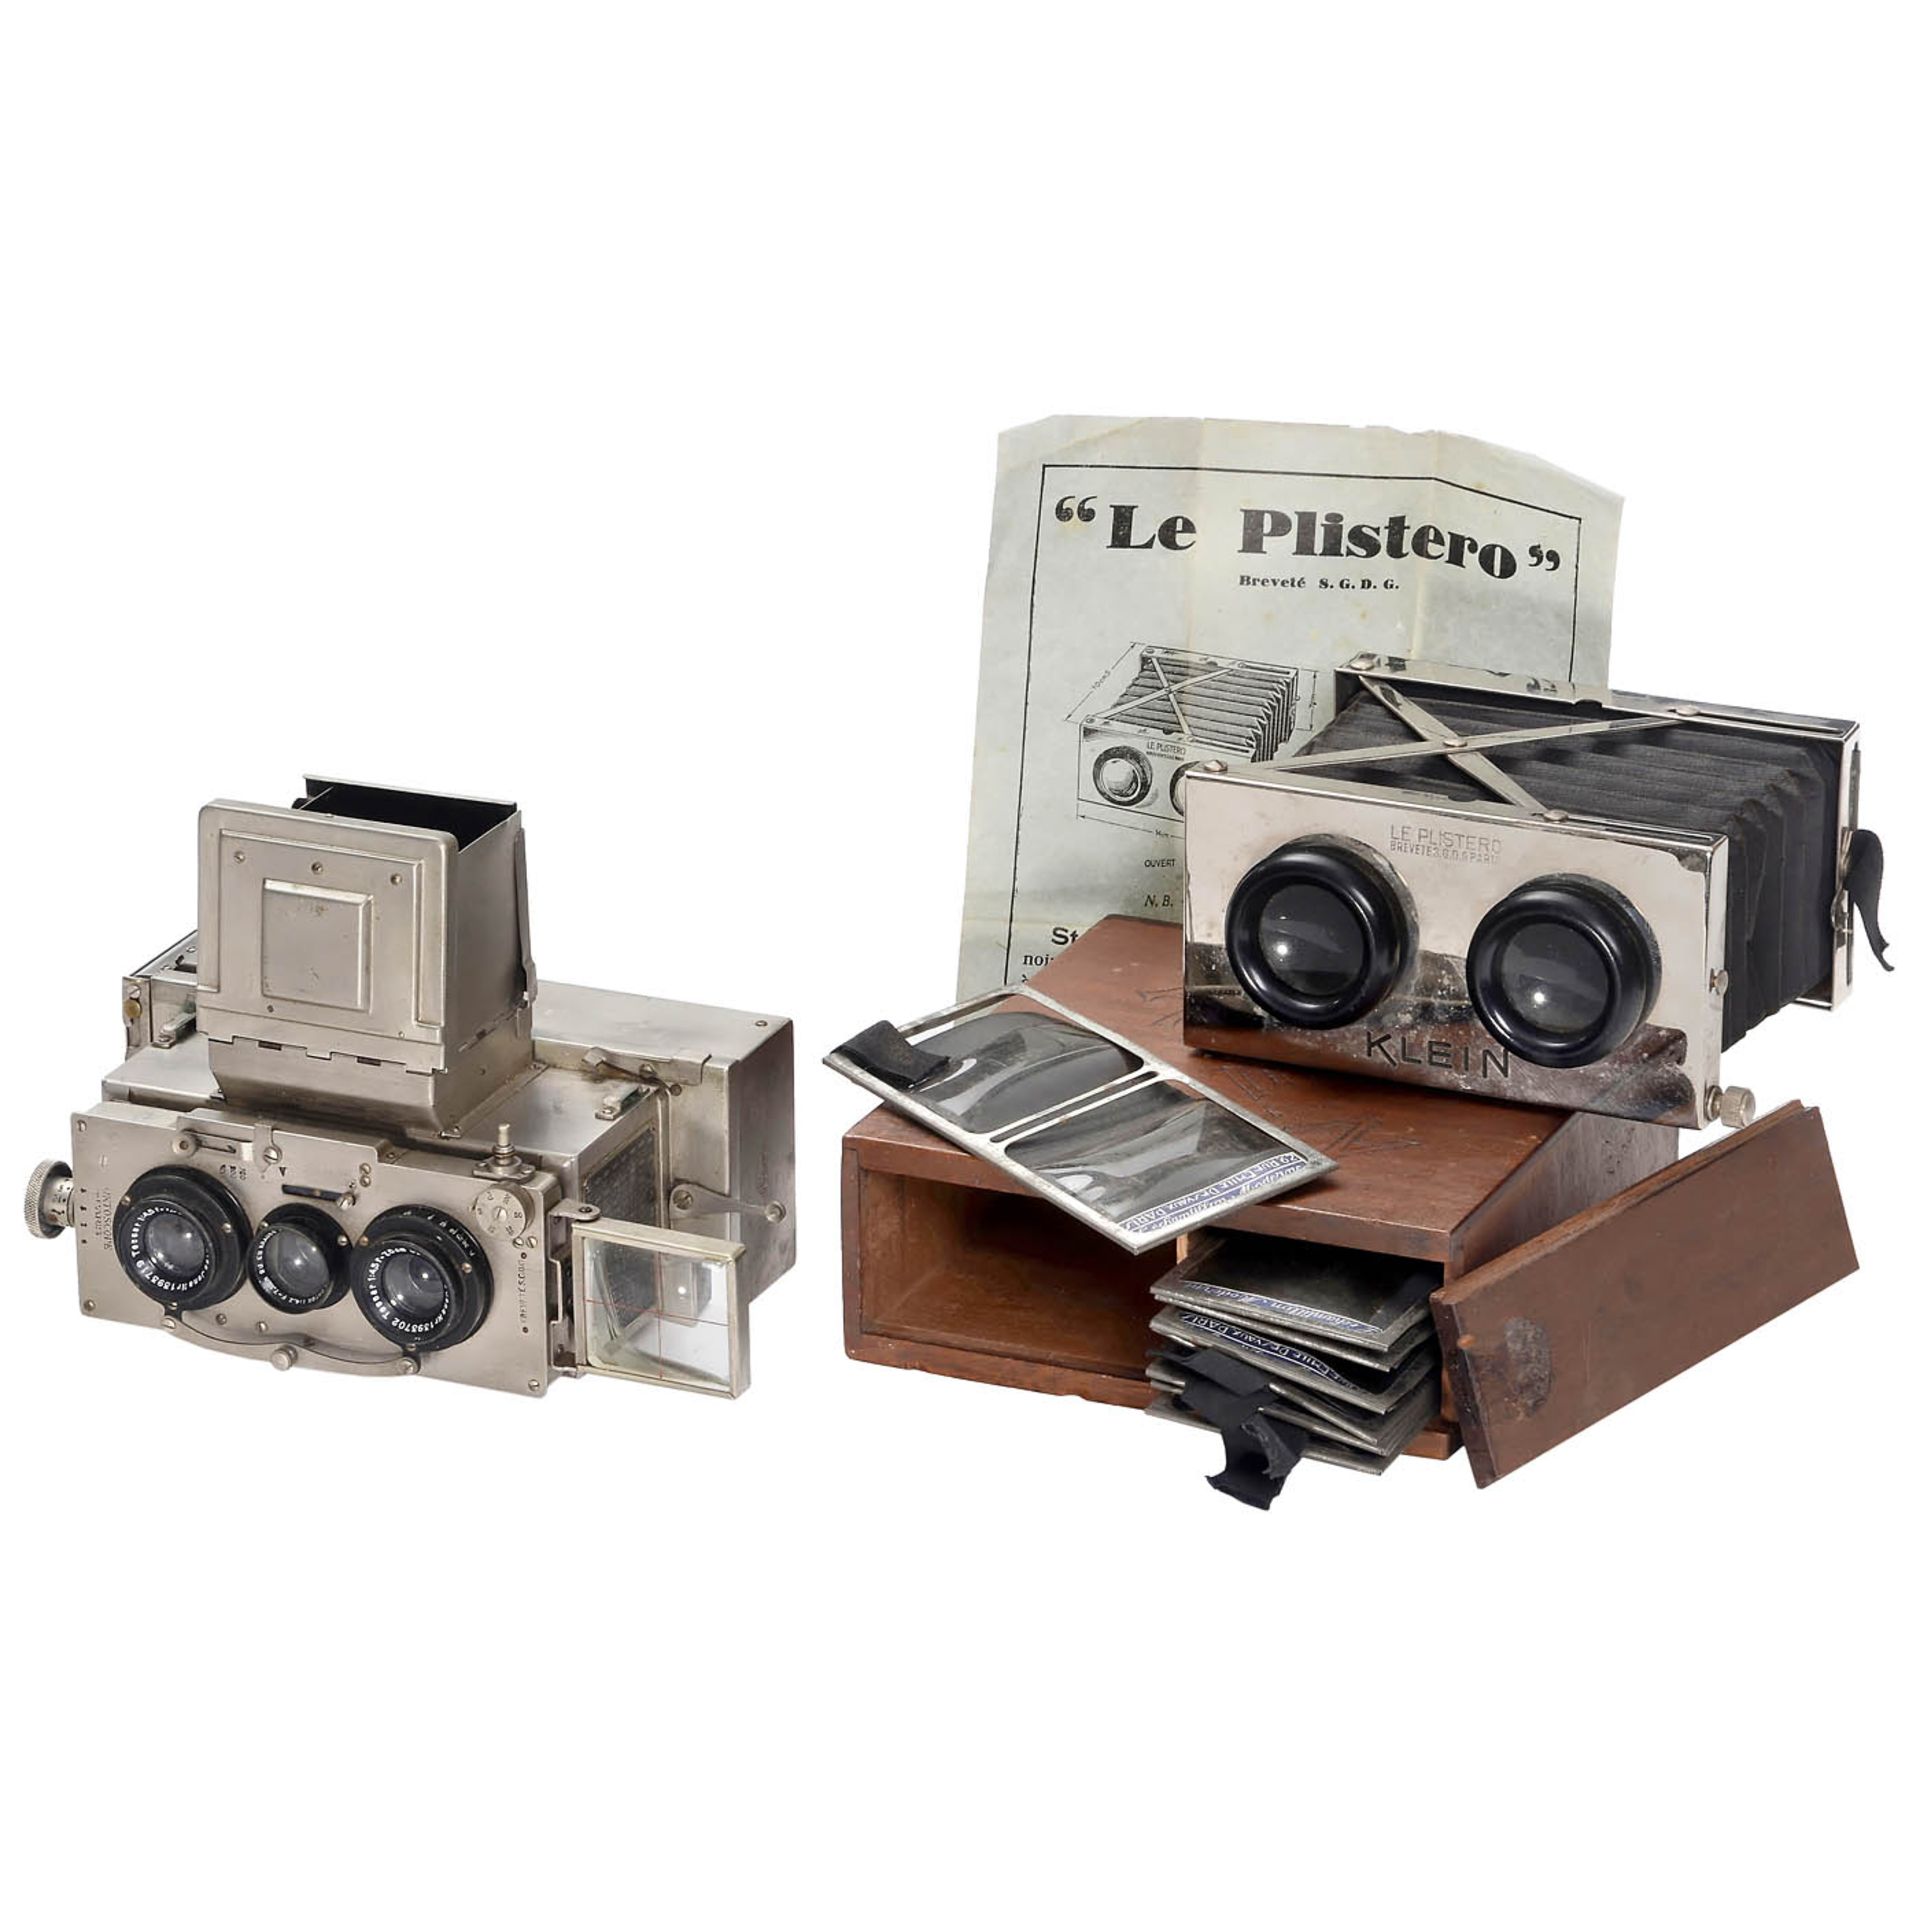 Cornu Ontoscope Stereo Camera and Stereo Viewer with Autochromes, c. 1930